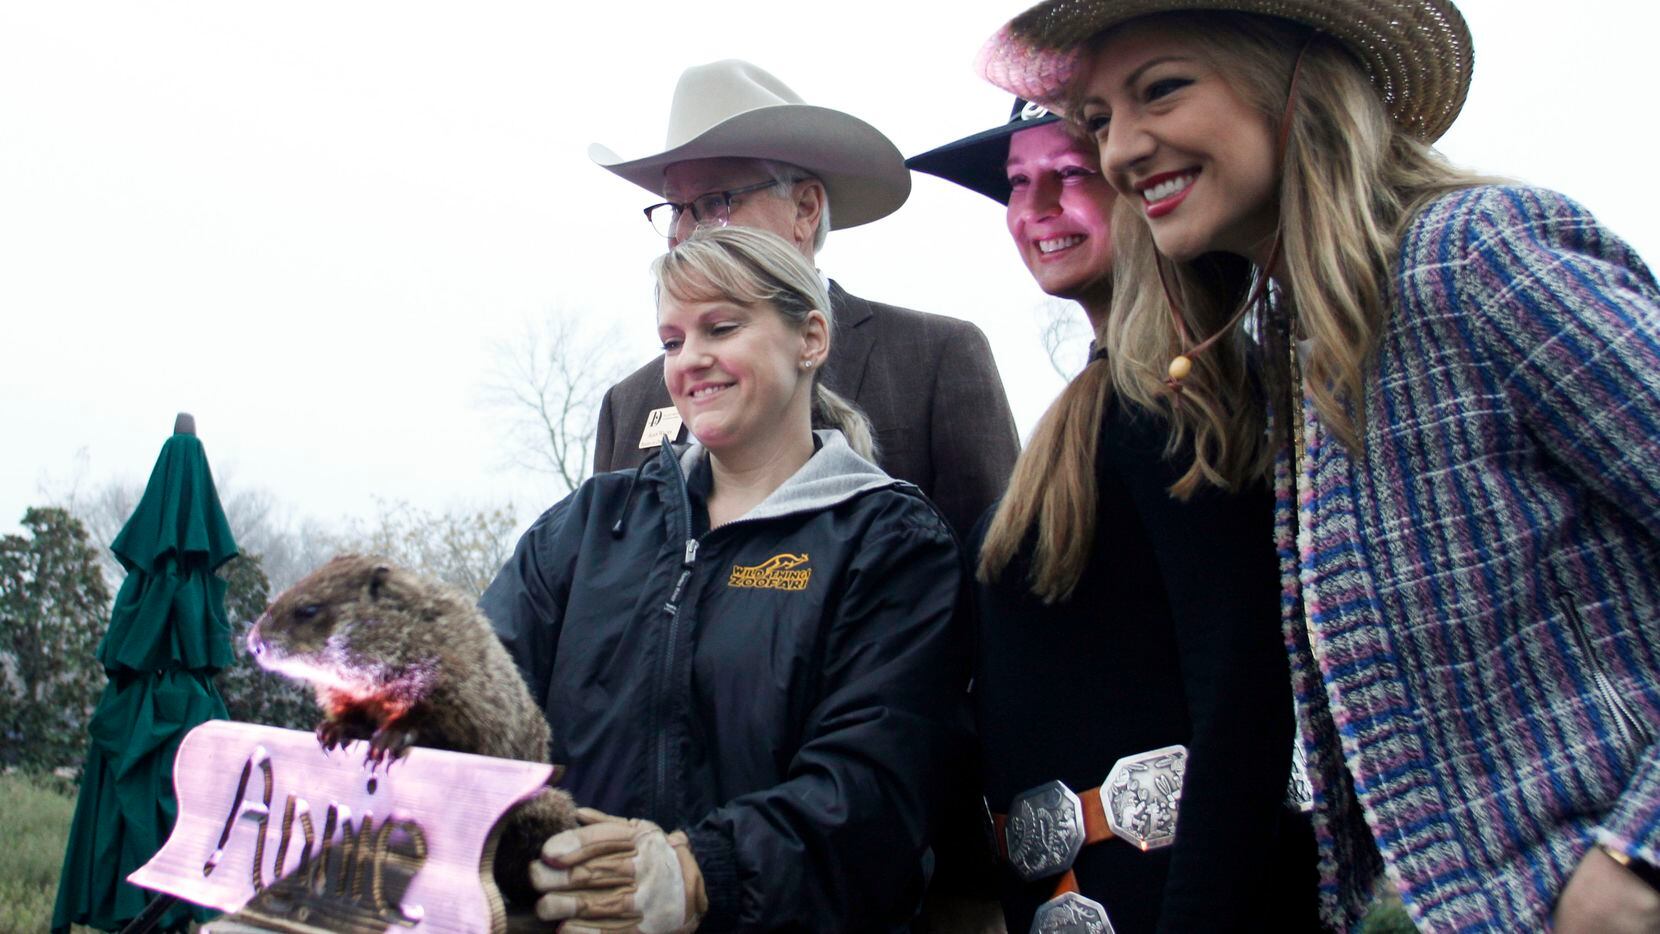 Annie the groundhog emerged at the Dallas Arboretum on  Feb. 2,  without seeing her shadow....